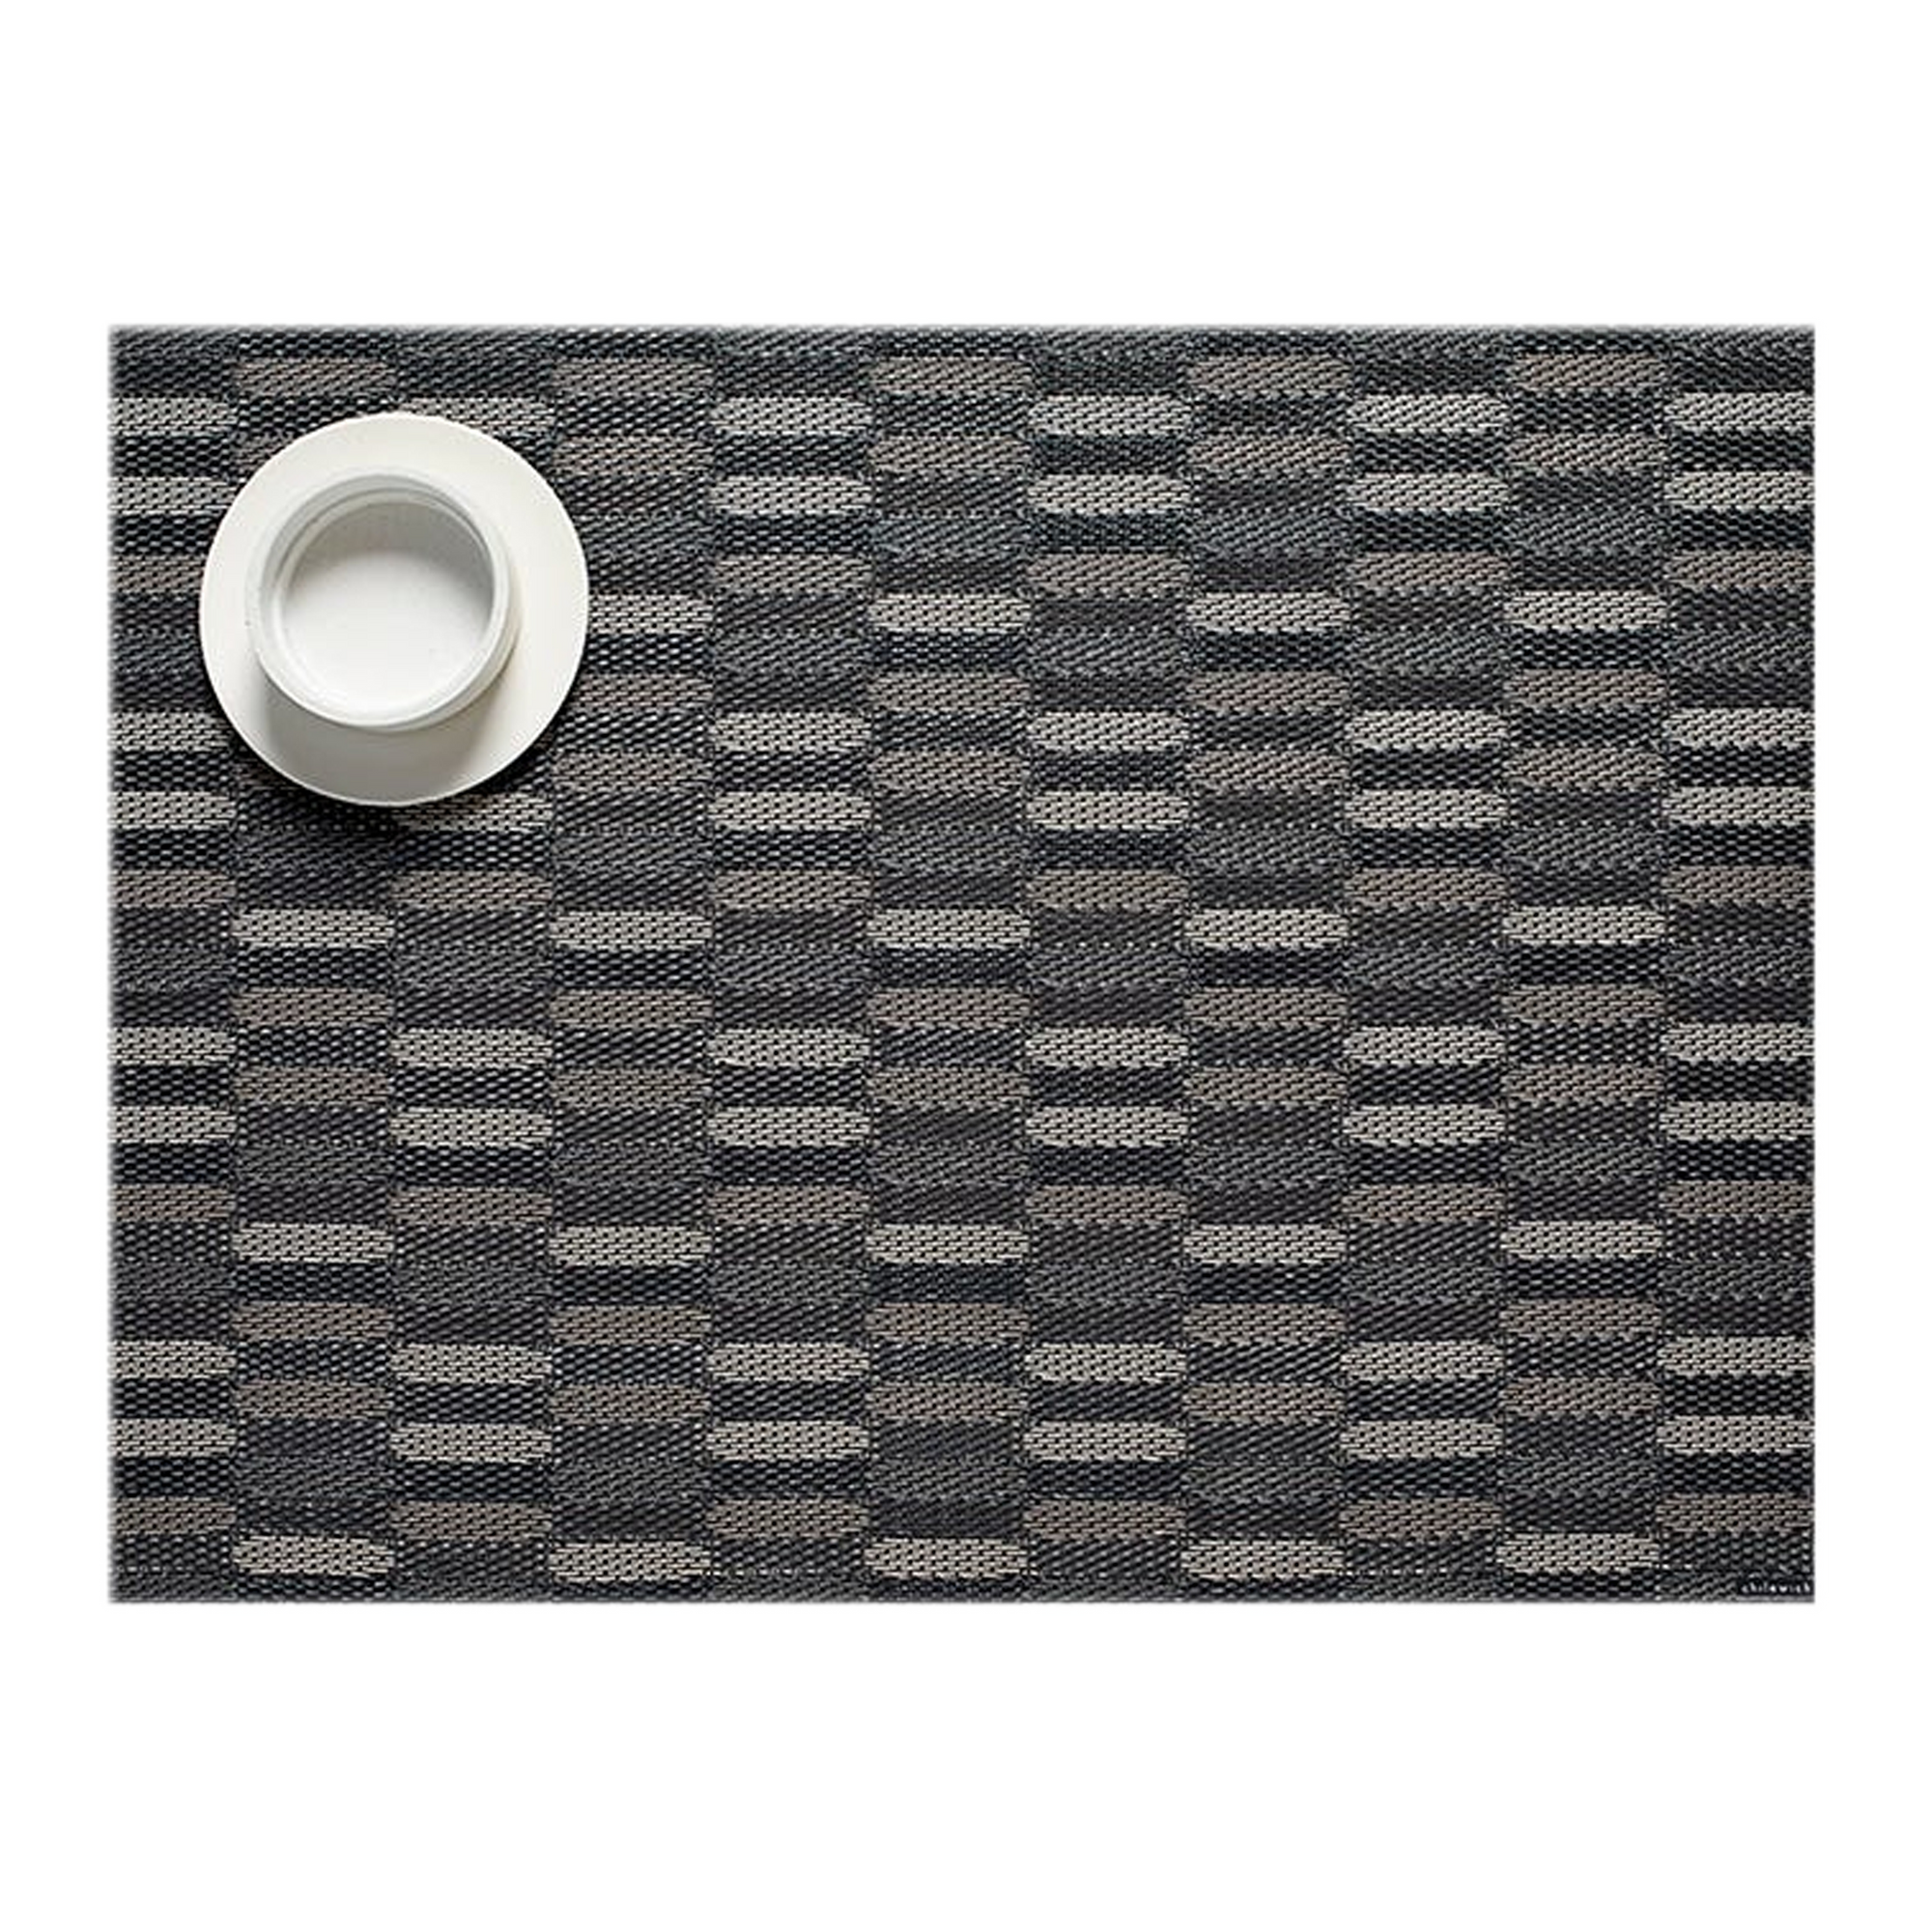 Exceptional in its versatility, Pebble is a richly textured canvas for Chilewich's nuanced approach to neutrals.